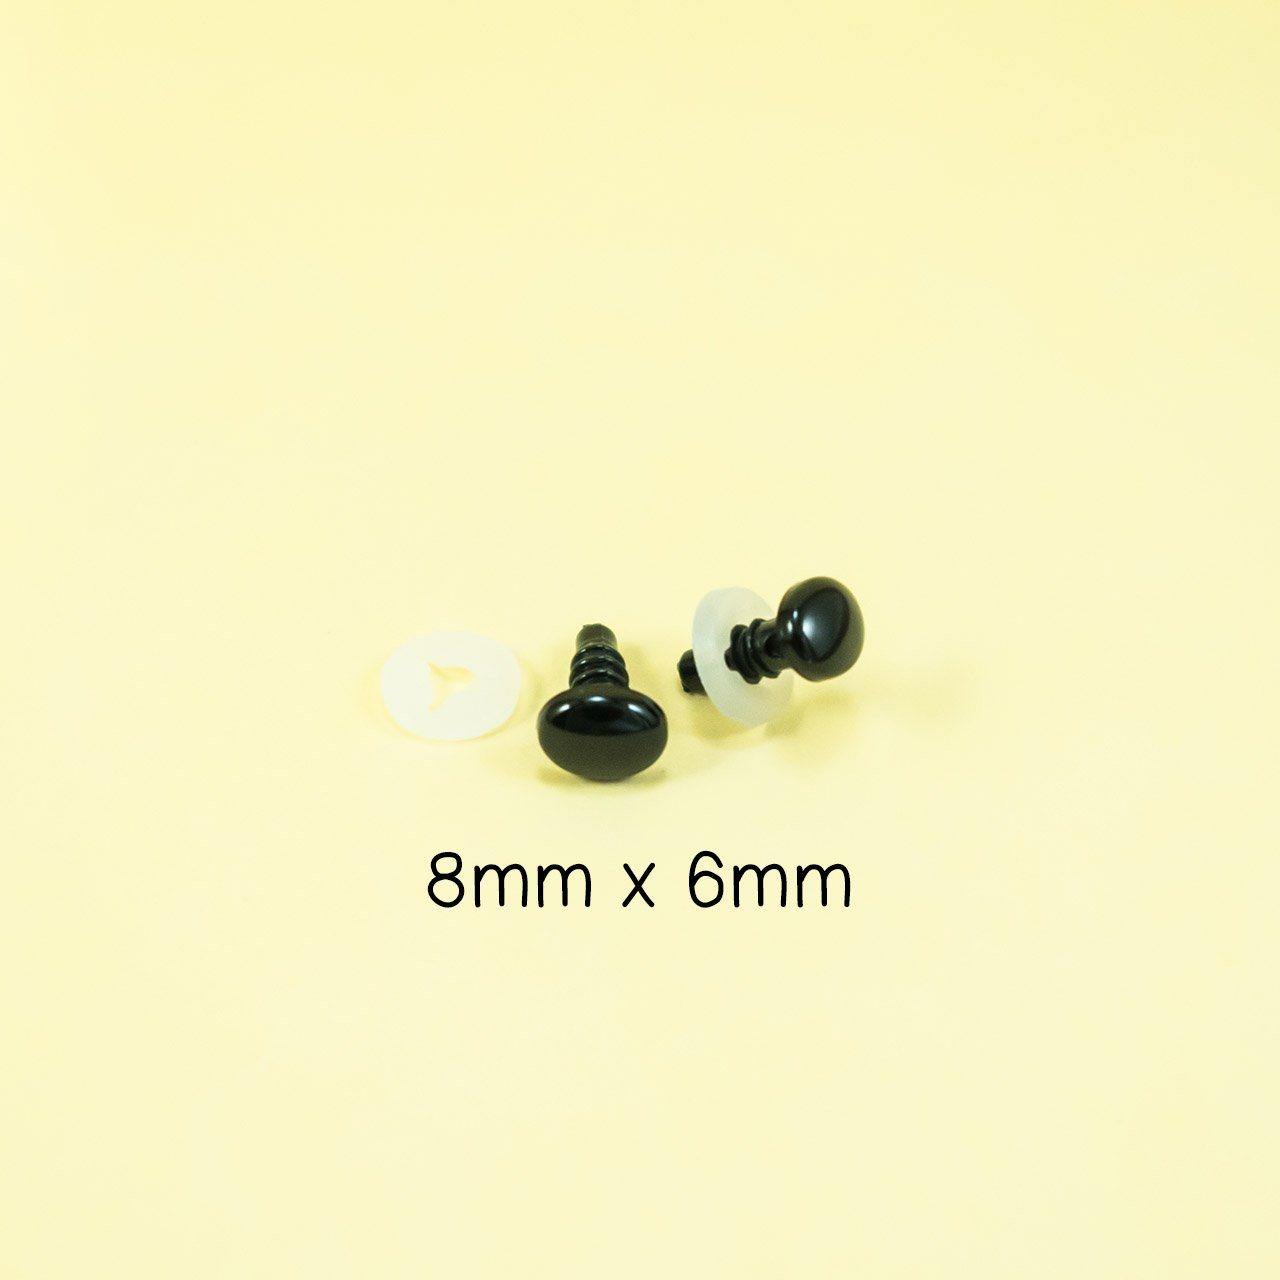 8mm x 6mm oval safety eyes / noses for amigurumi